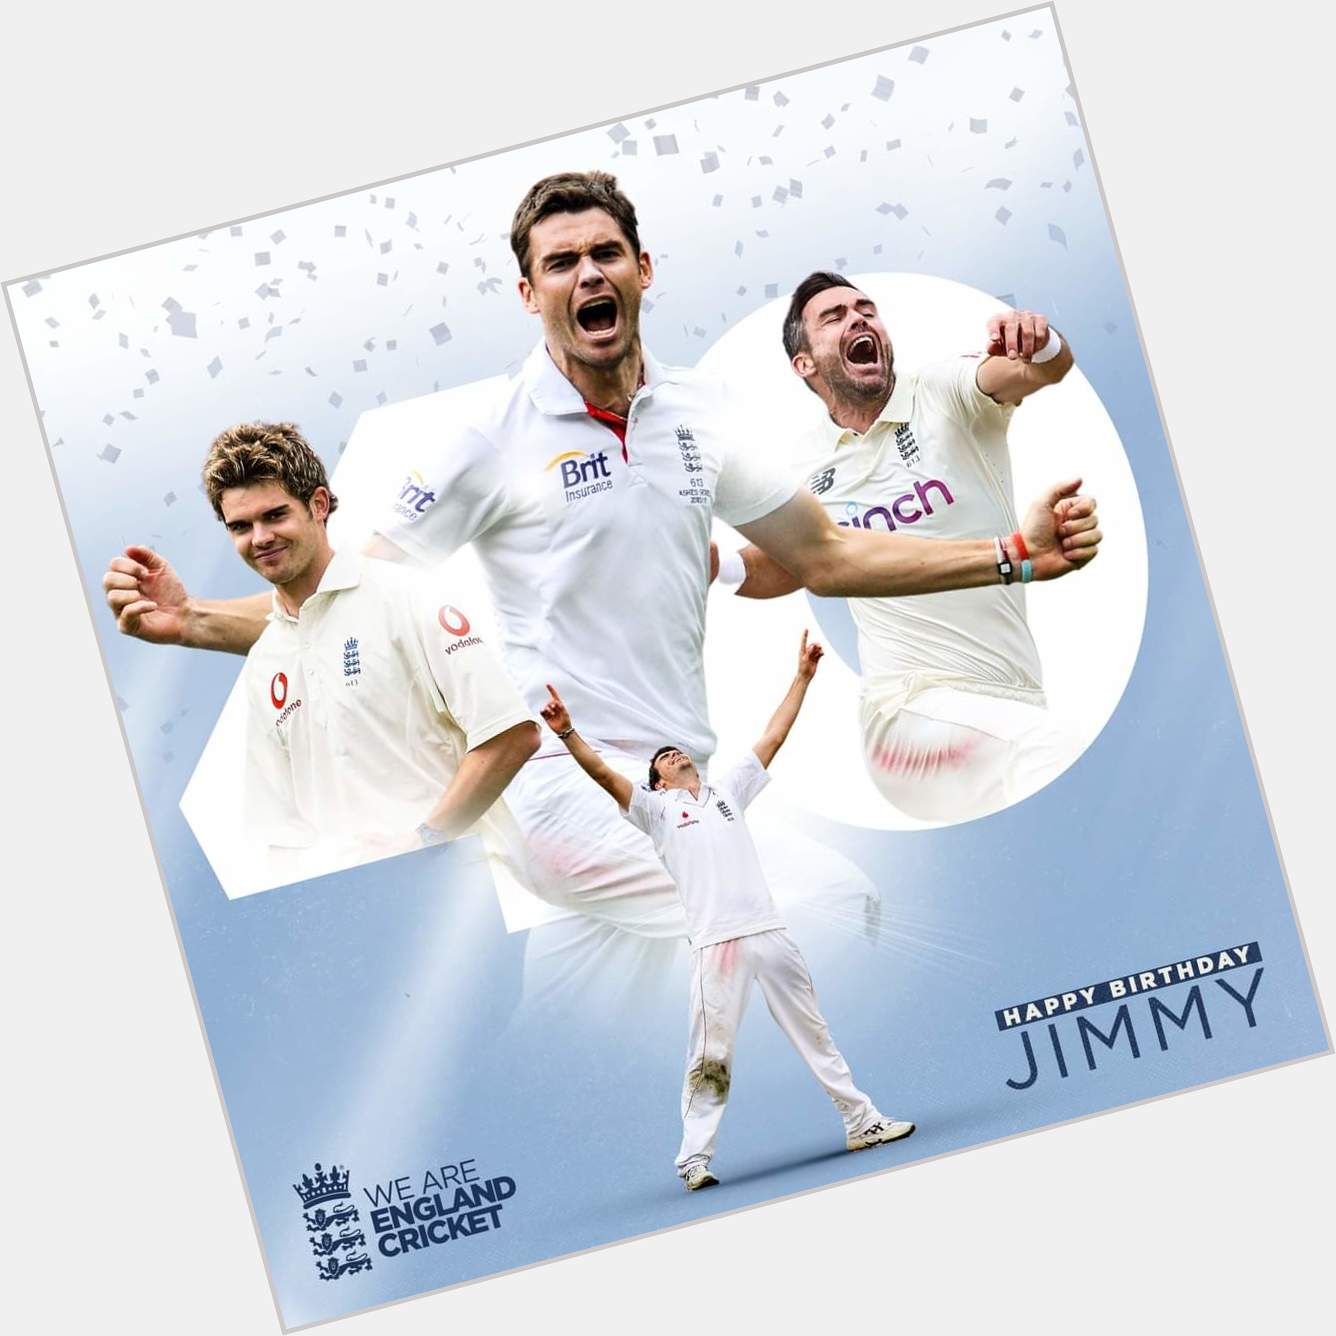 Happy Birthday to James Anderson  Time and again proving age is only a number 